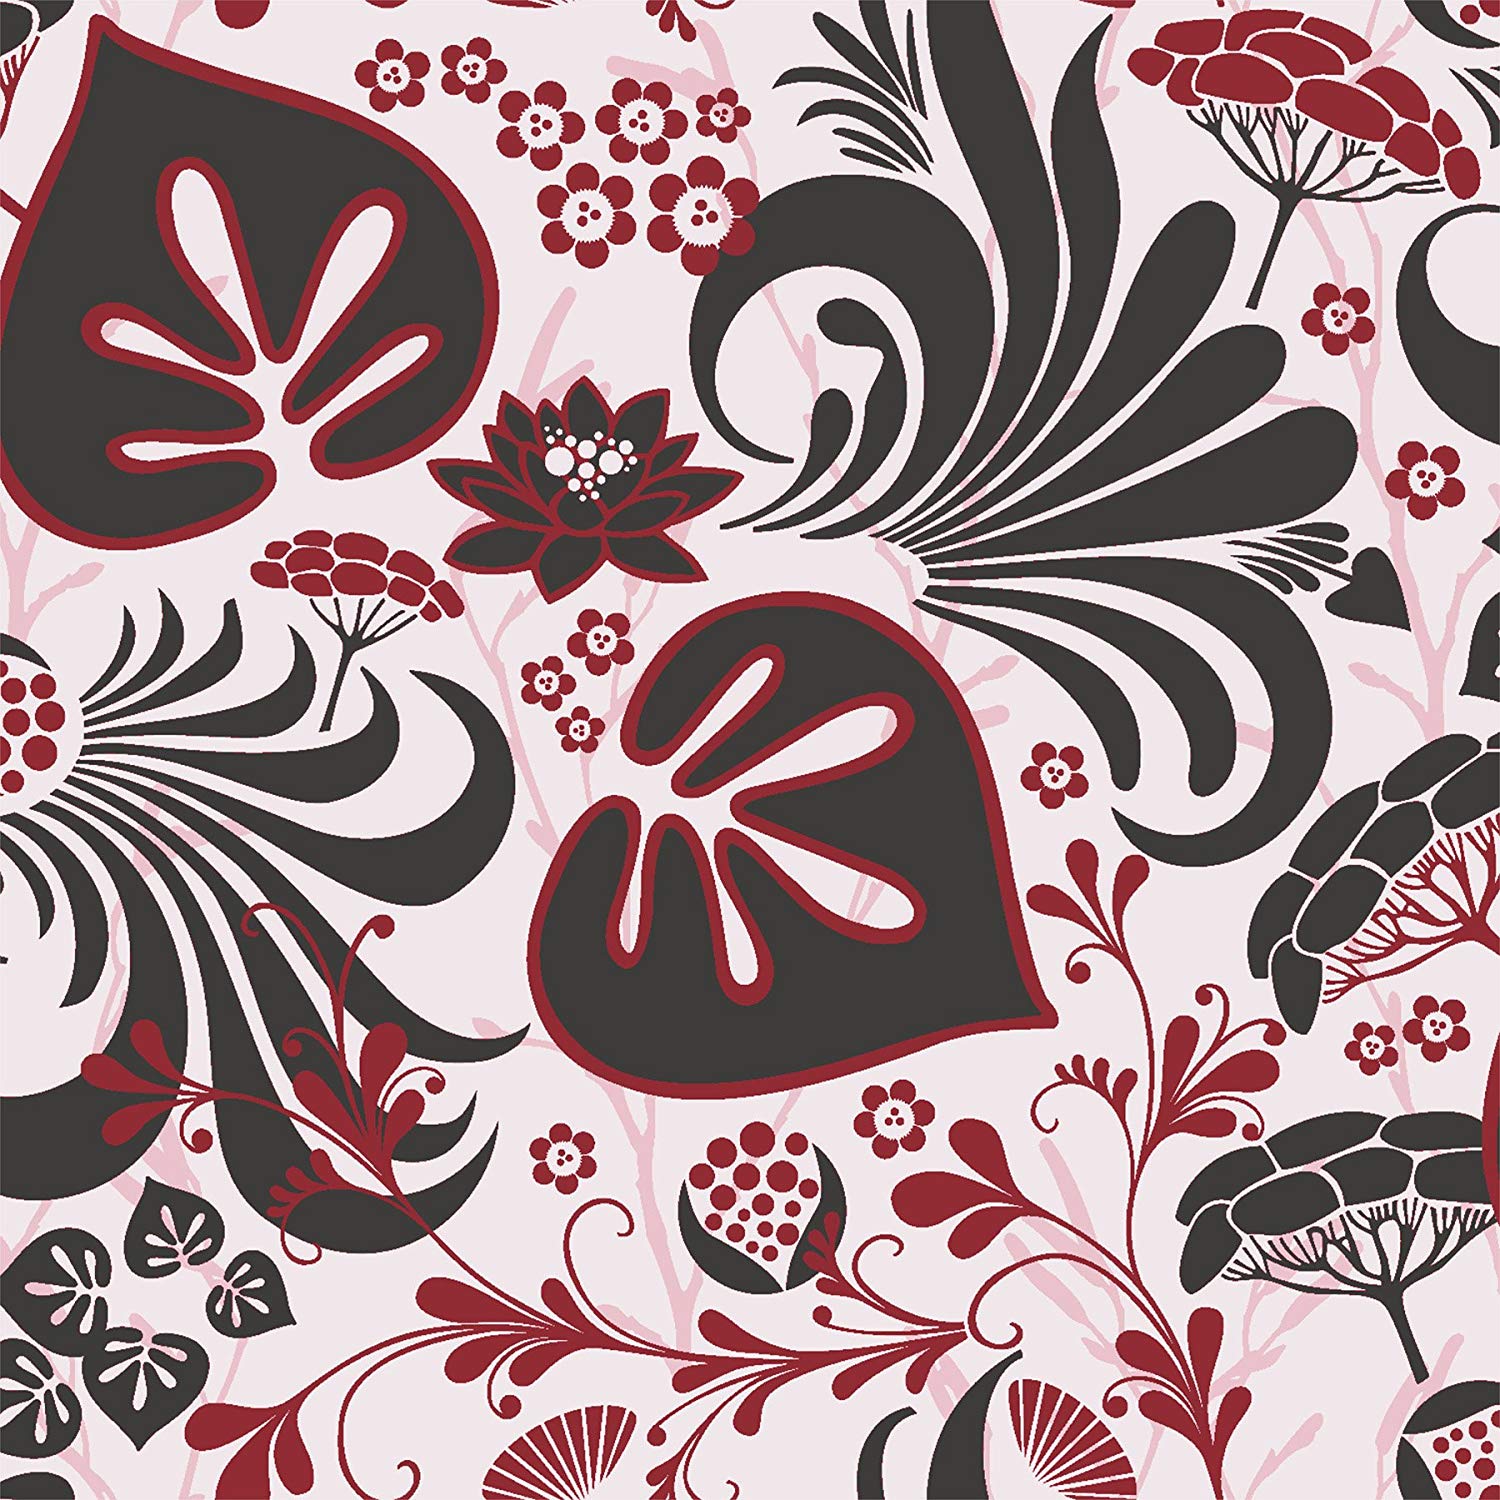 Hanna Werning 1317 Non-Woven Wallpaper with Flower Design Black Red White